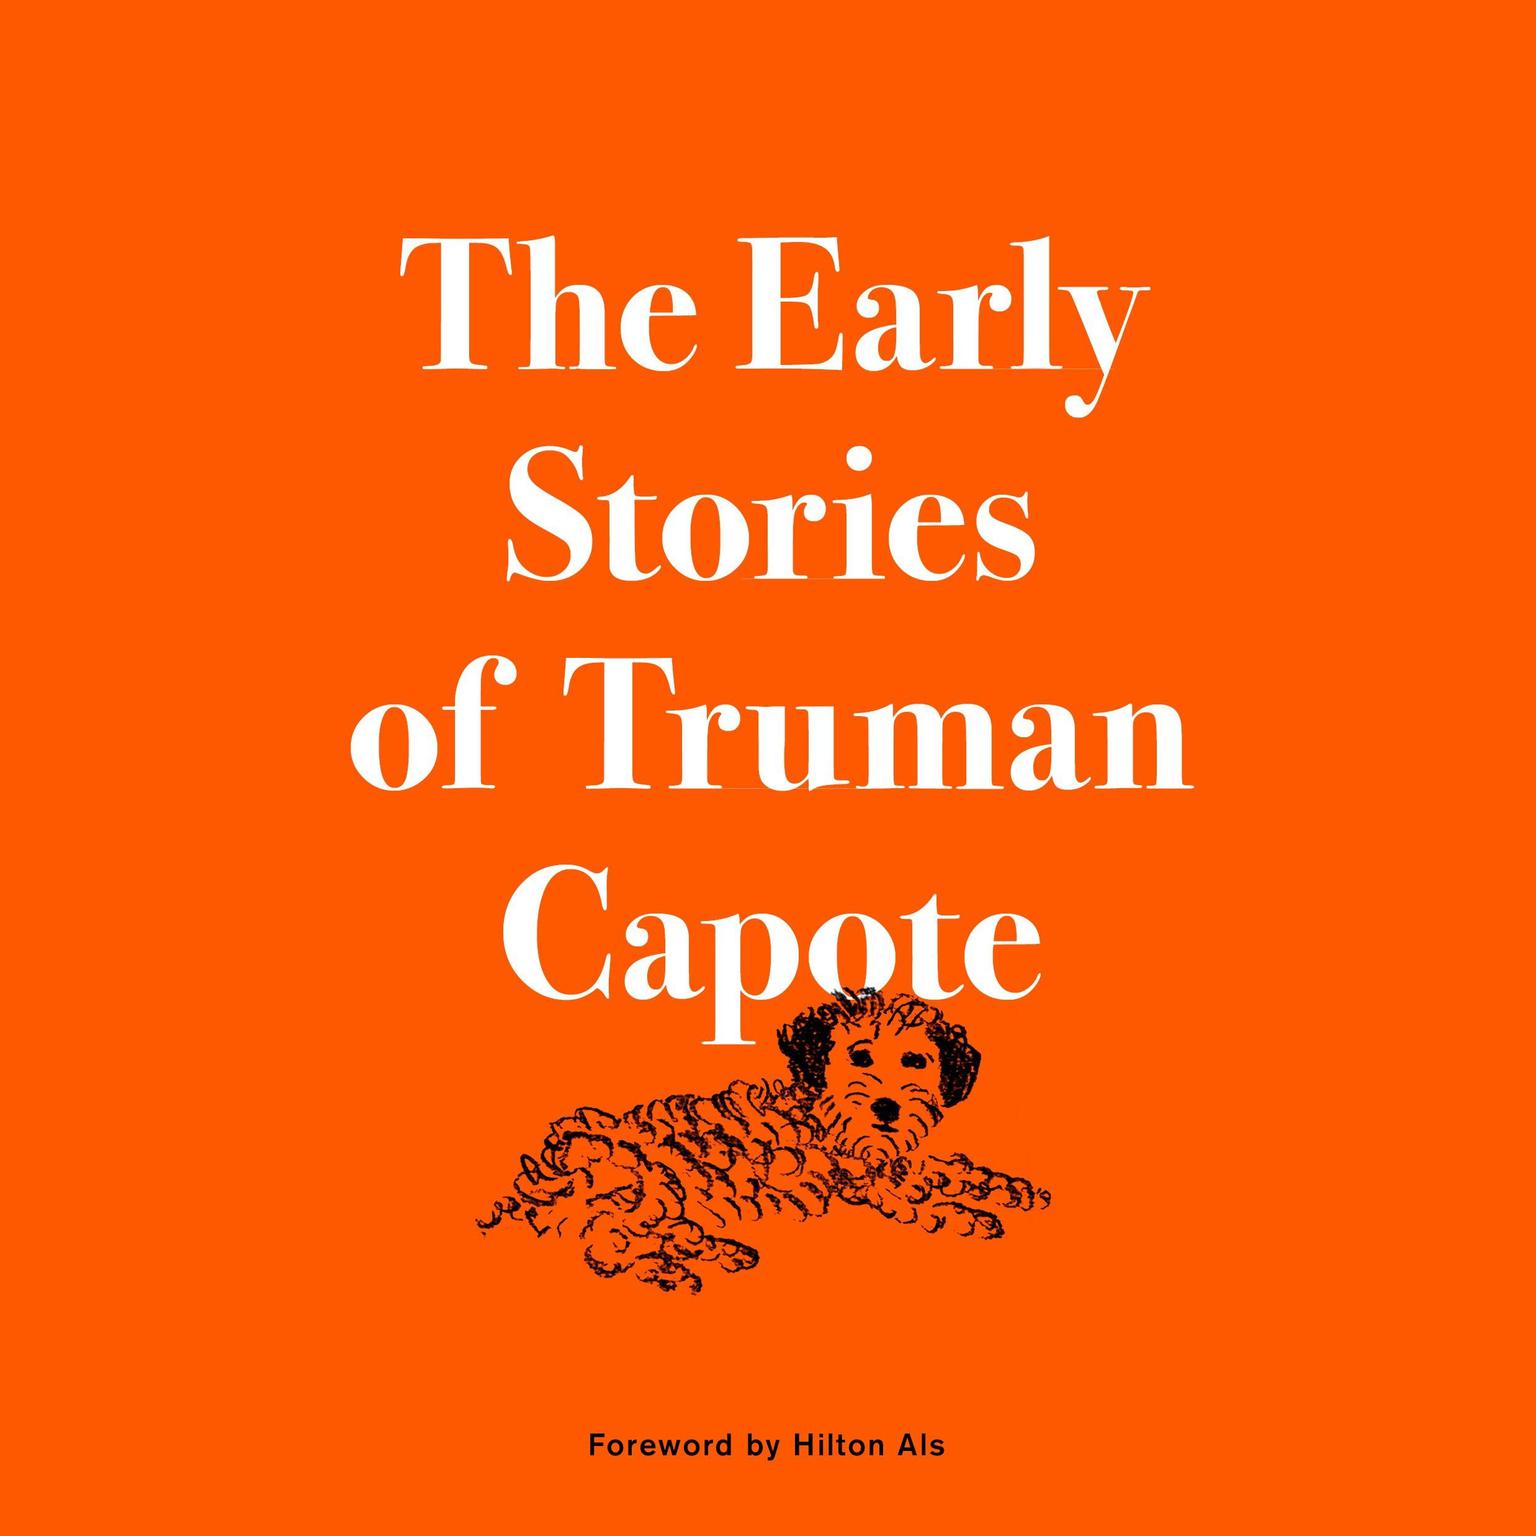 The Early Stories of Truman Capote Audiobook, by Truman Capote